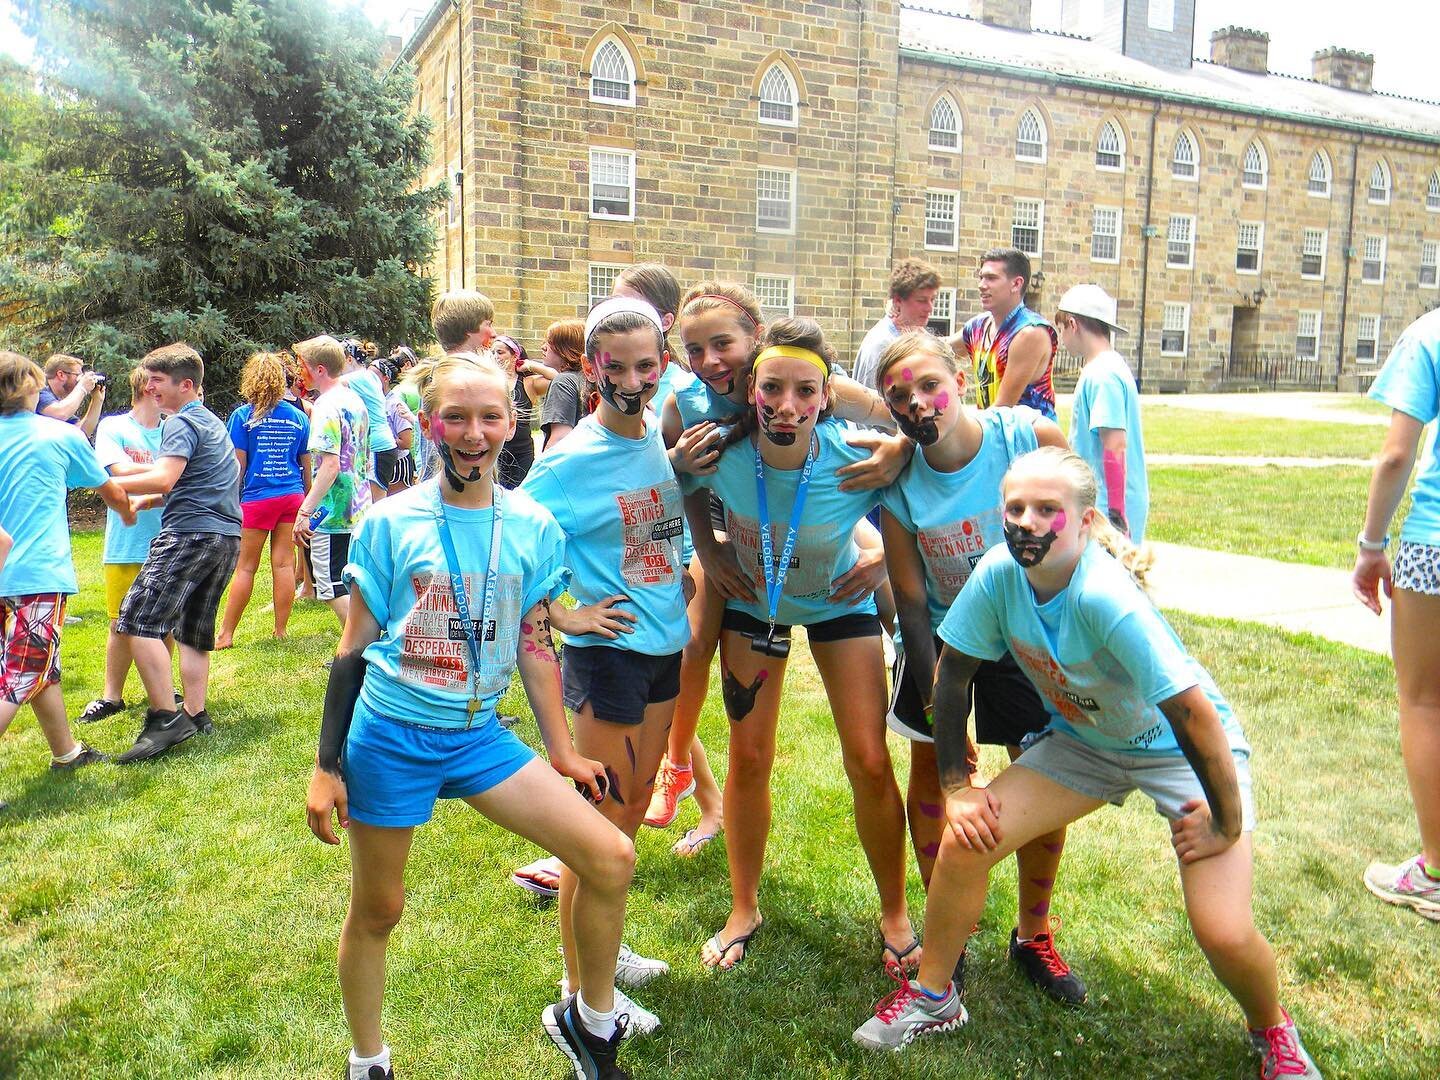 Sydney Bergquist: &ldquo;I went to velocity seven years in a row and it&rsquo;s still my favorite memory from growing up! 10/10 so worth it!&rdquo; (Photo: Velocity 2012 at Kenyon College)